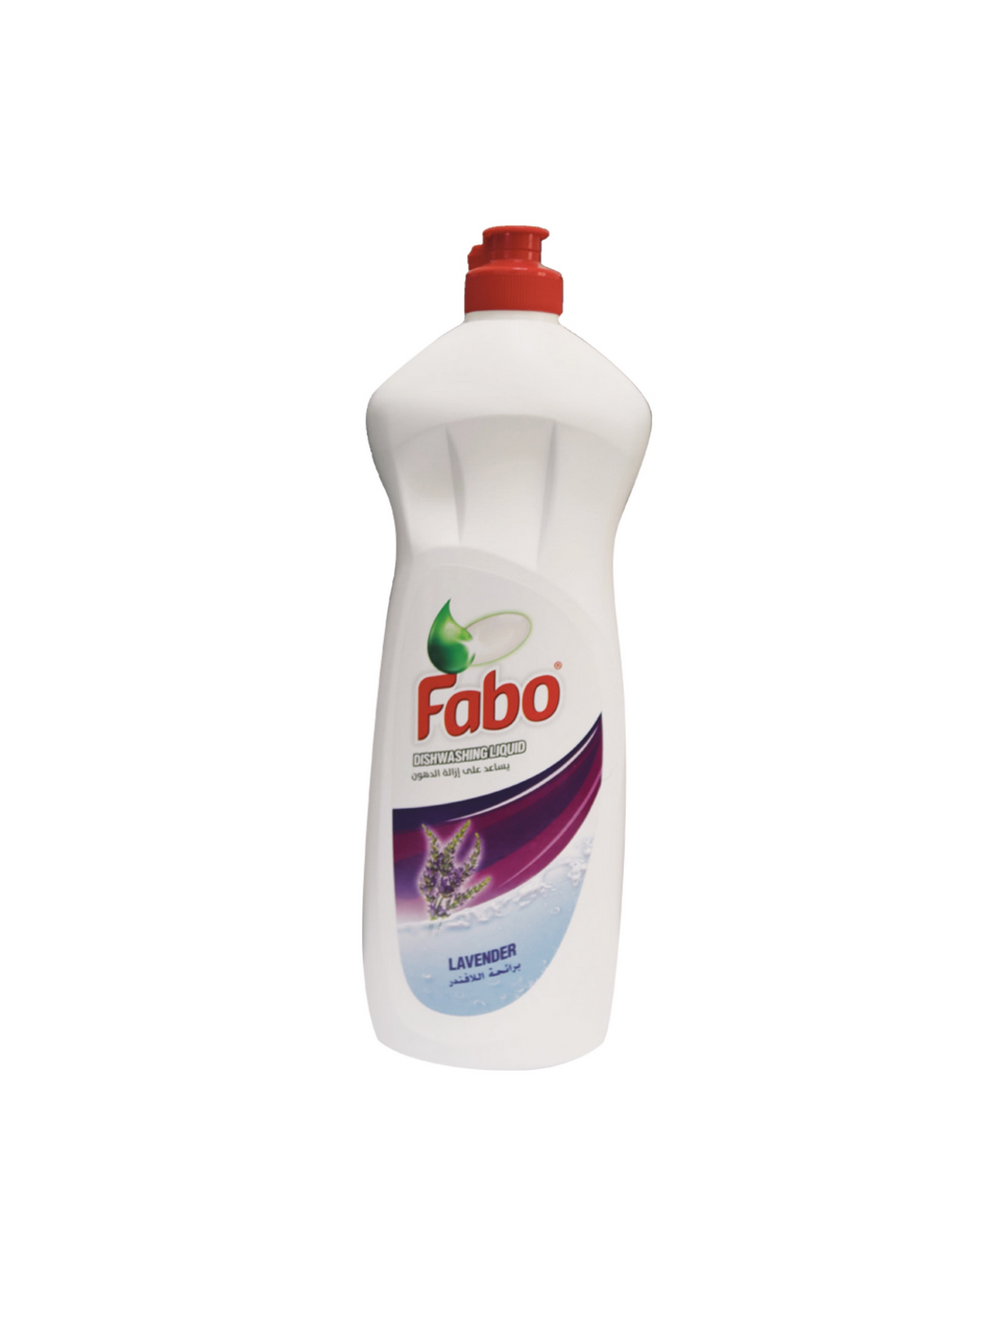 fabo-products_page-0022